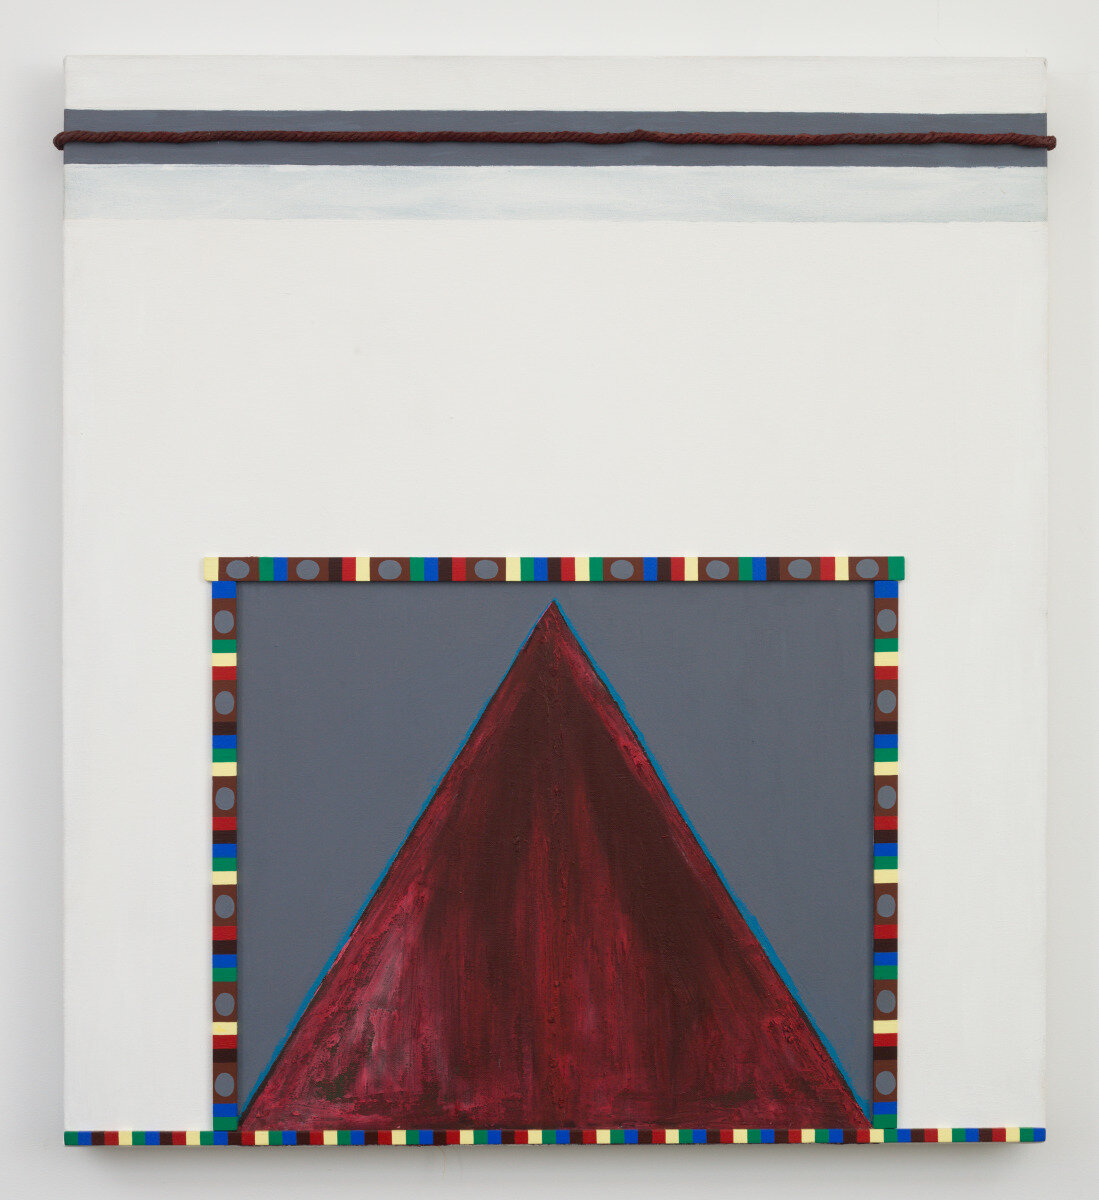  The Phoenix and the Mountain #11, 1980, acrylic, wood, rope on canvas, 40 x 36 in (102 x 91,5 cm) 